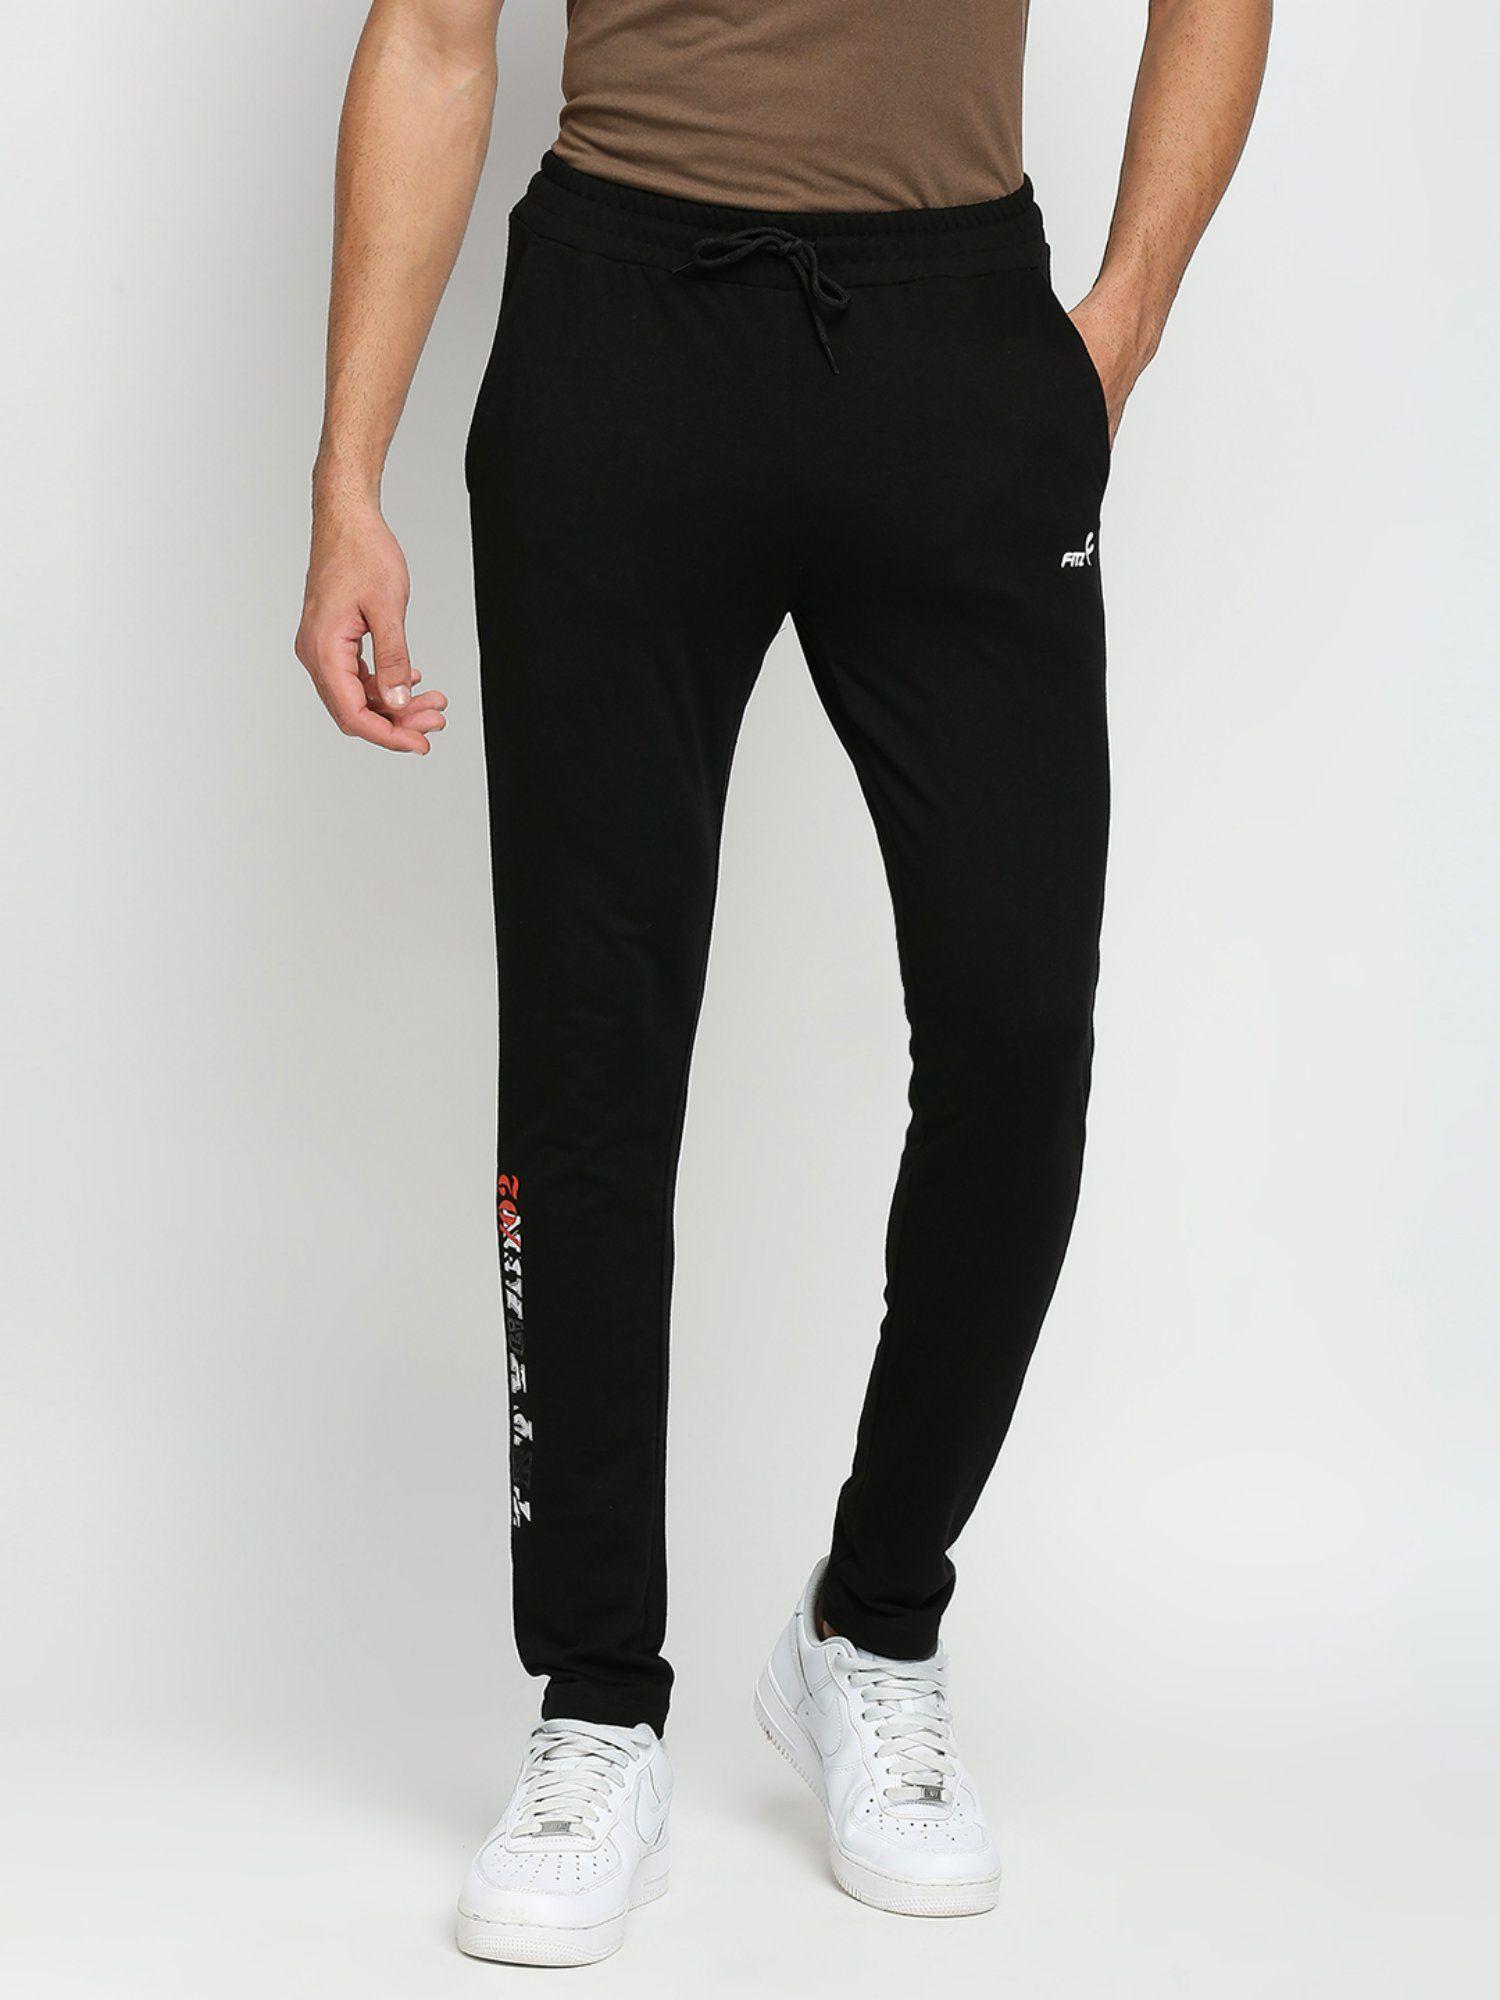 cotton polyester slim fit french terry knit joggers for mens - black